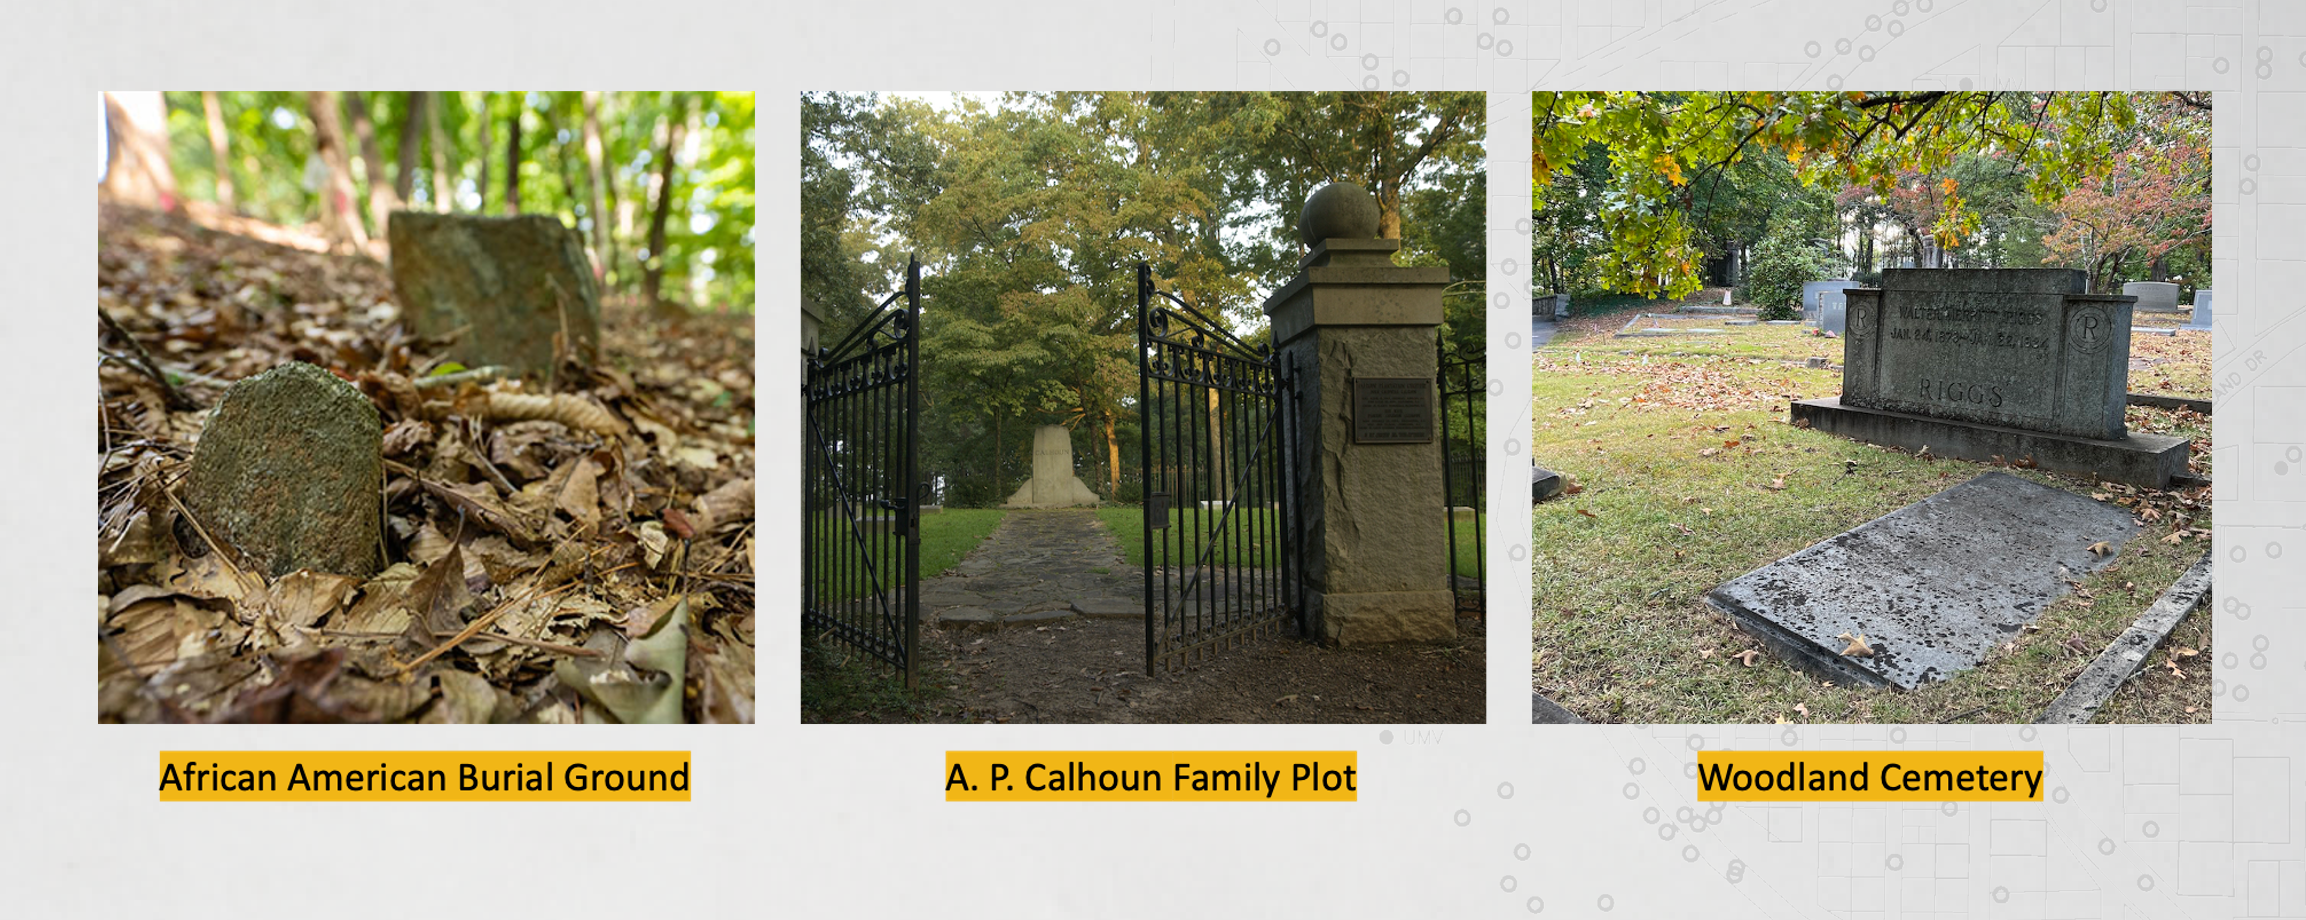 The African American Burial Ground, Andrew Pickens Calhoun Family Plot, and Woodland Cemetery at Clemson University